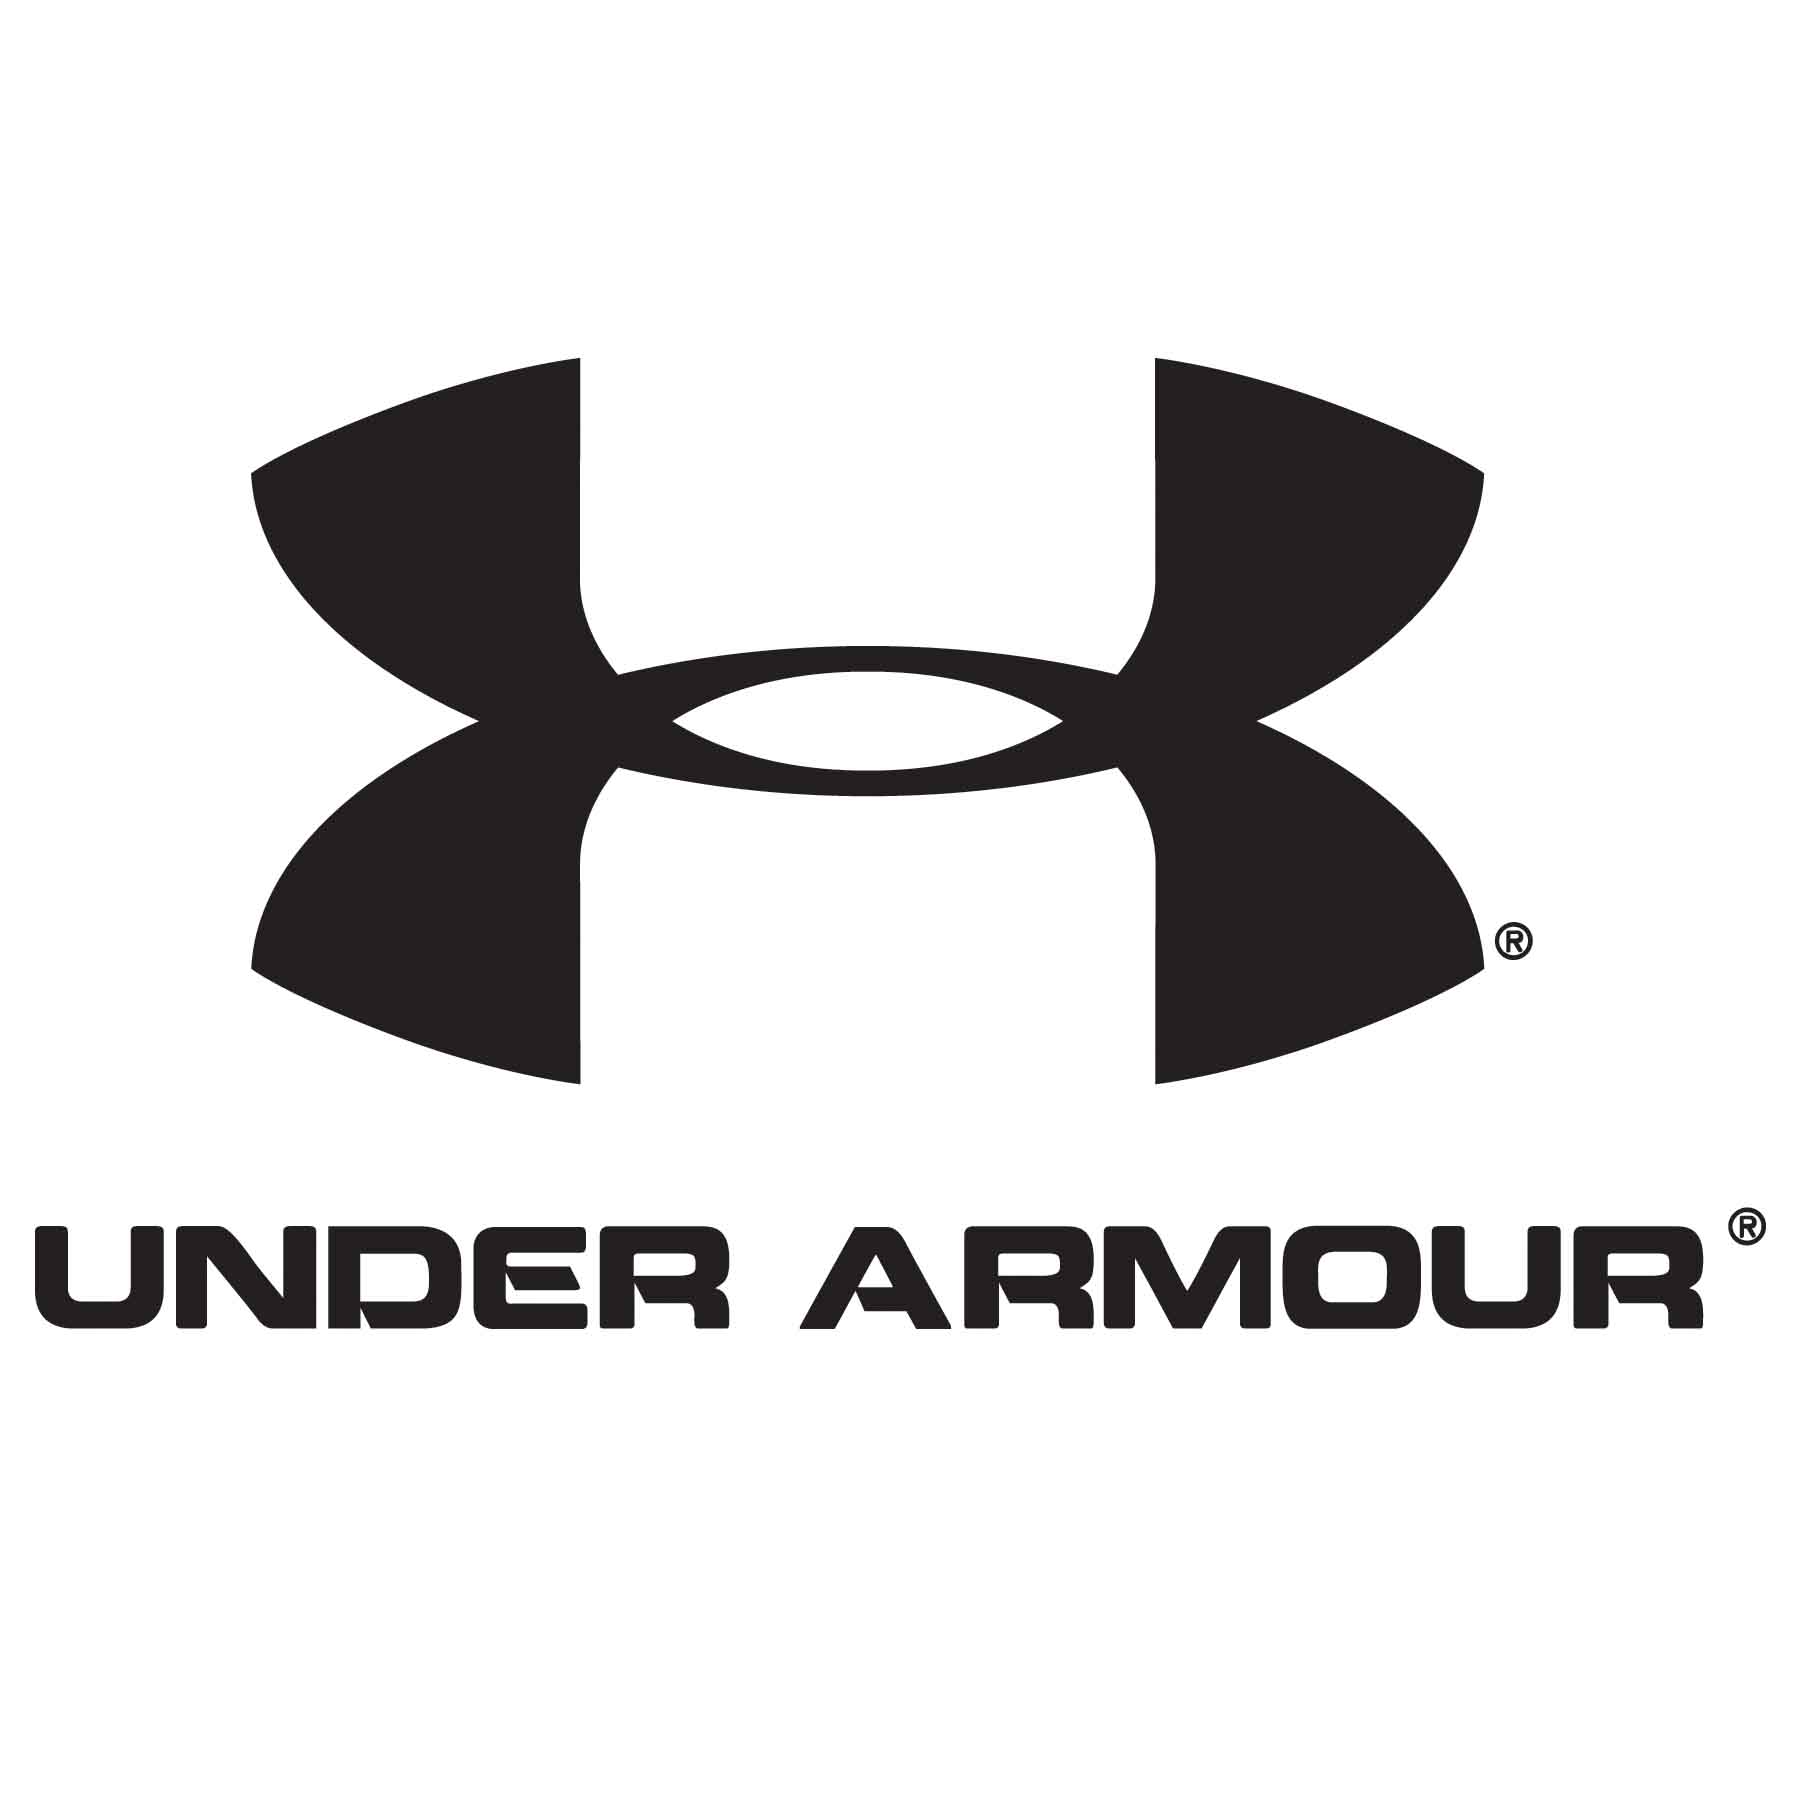 share under armour logo wallpaper gallery to the pinterest facebook 1800x1800